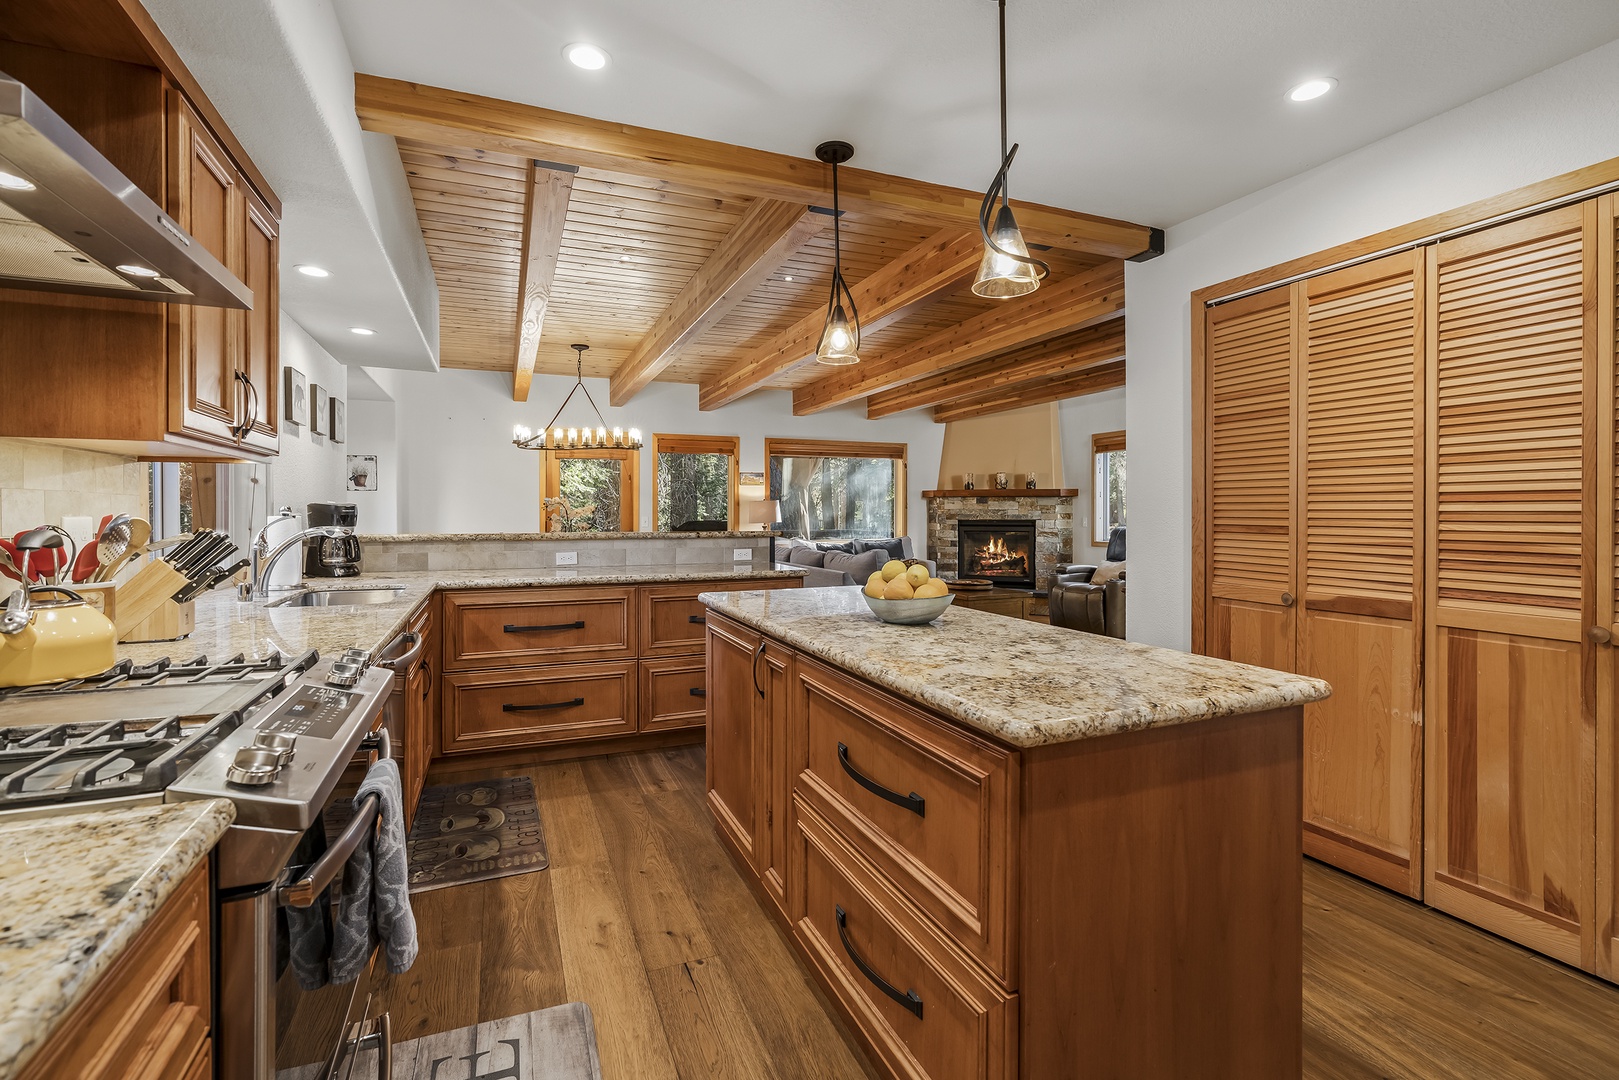 Kitchen With Island:  Quittin' Time Chalet